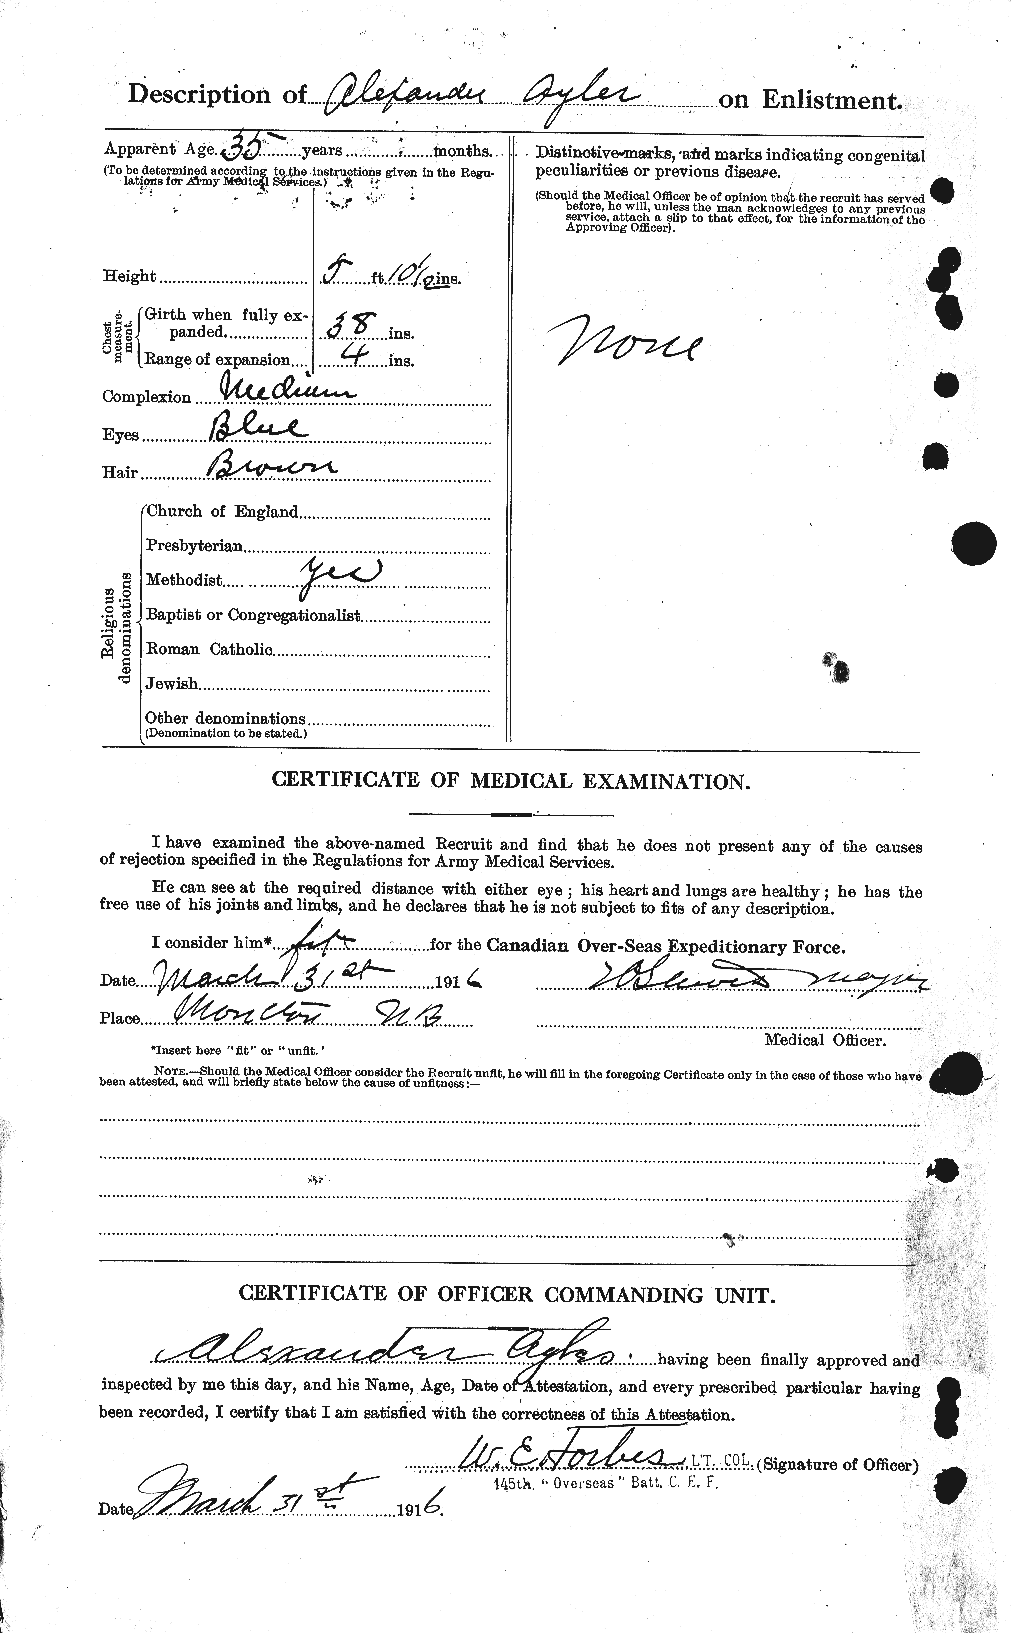 Personnel Records of the First World War - CEF 215815b